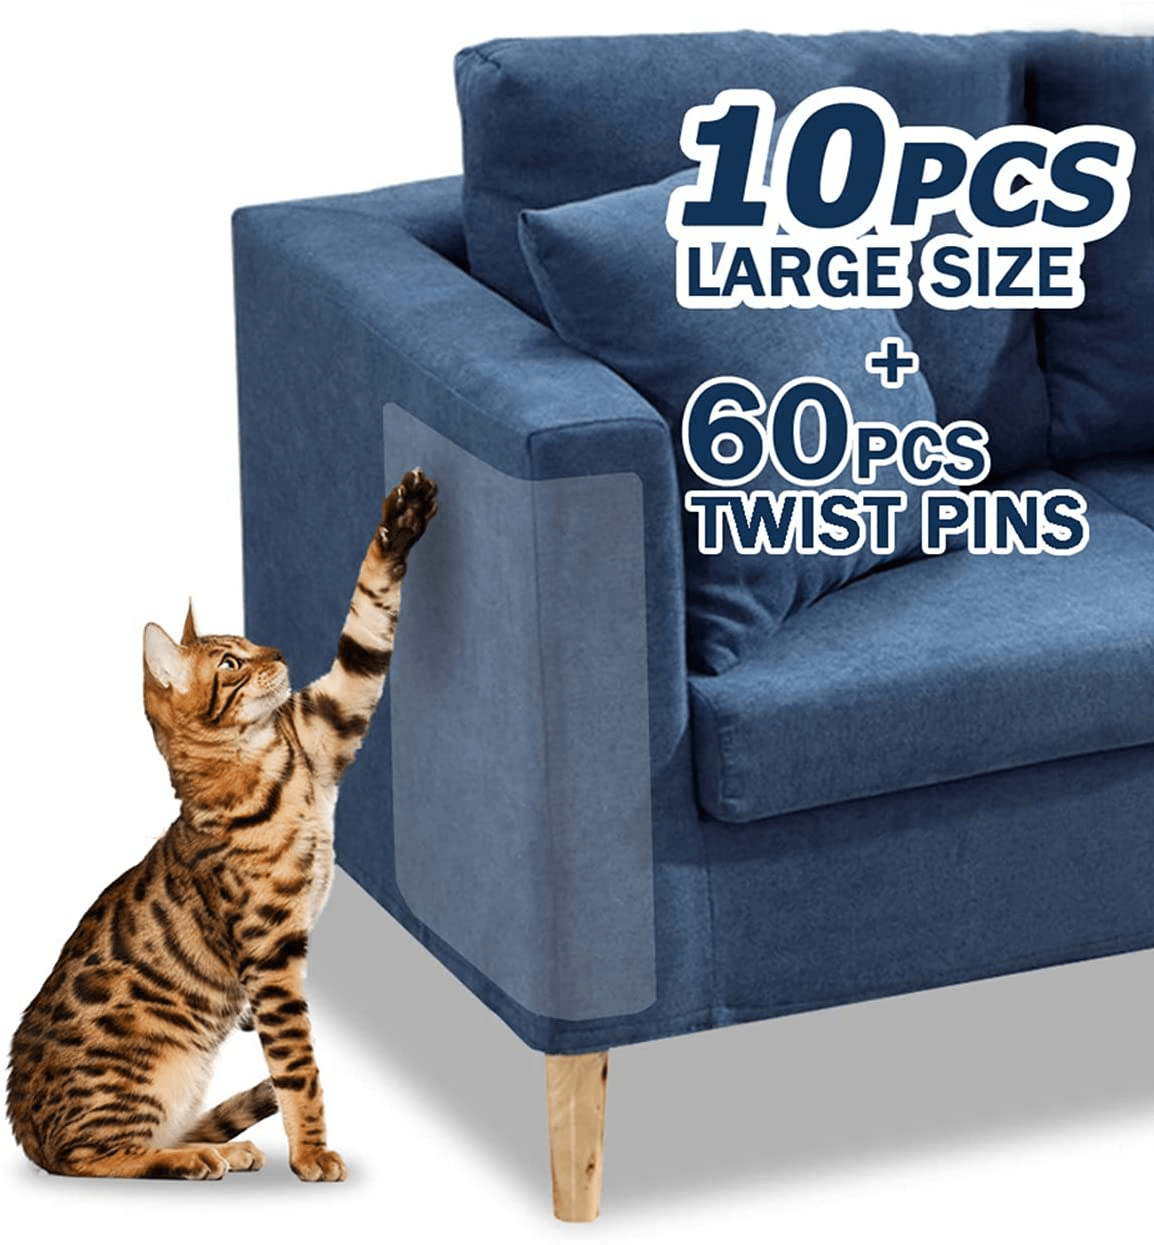 10 Pcs Furniture Protectors from Cats, Clear Self-Adhesive Cat Scratch Deterrent, Couch Protector 4 Pack X-Large (18"L 12"W) + 4 Pack Large (18"L 9"W) + 2 Pack (18"L 6"W) Cat Repellent for Furniture, Animals & Pet Supplies > Pet Supplies > Cat Supplies > Cat Furniture FTSTC 10PCS for fabric, leather, etc.(for all sofas)  